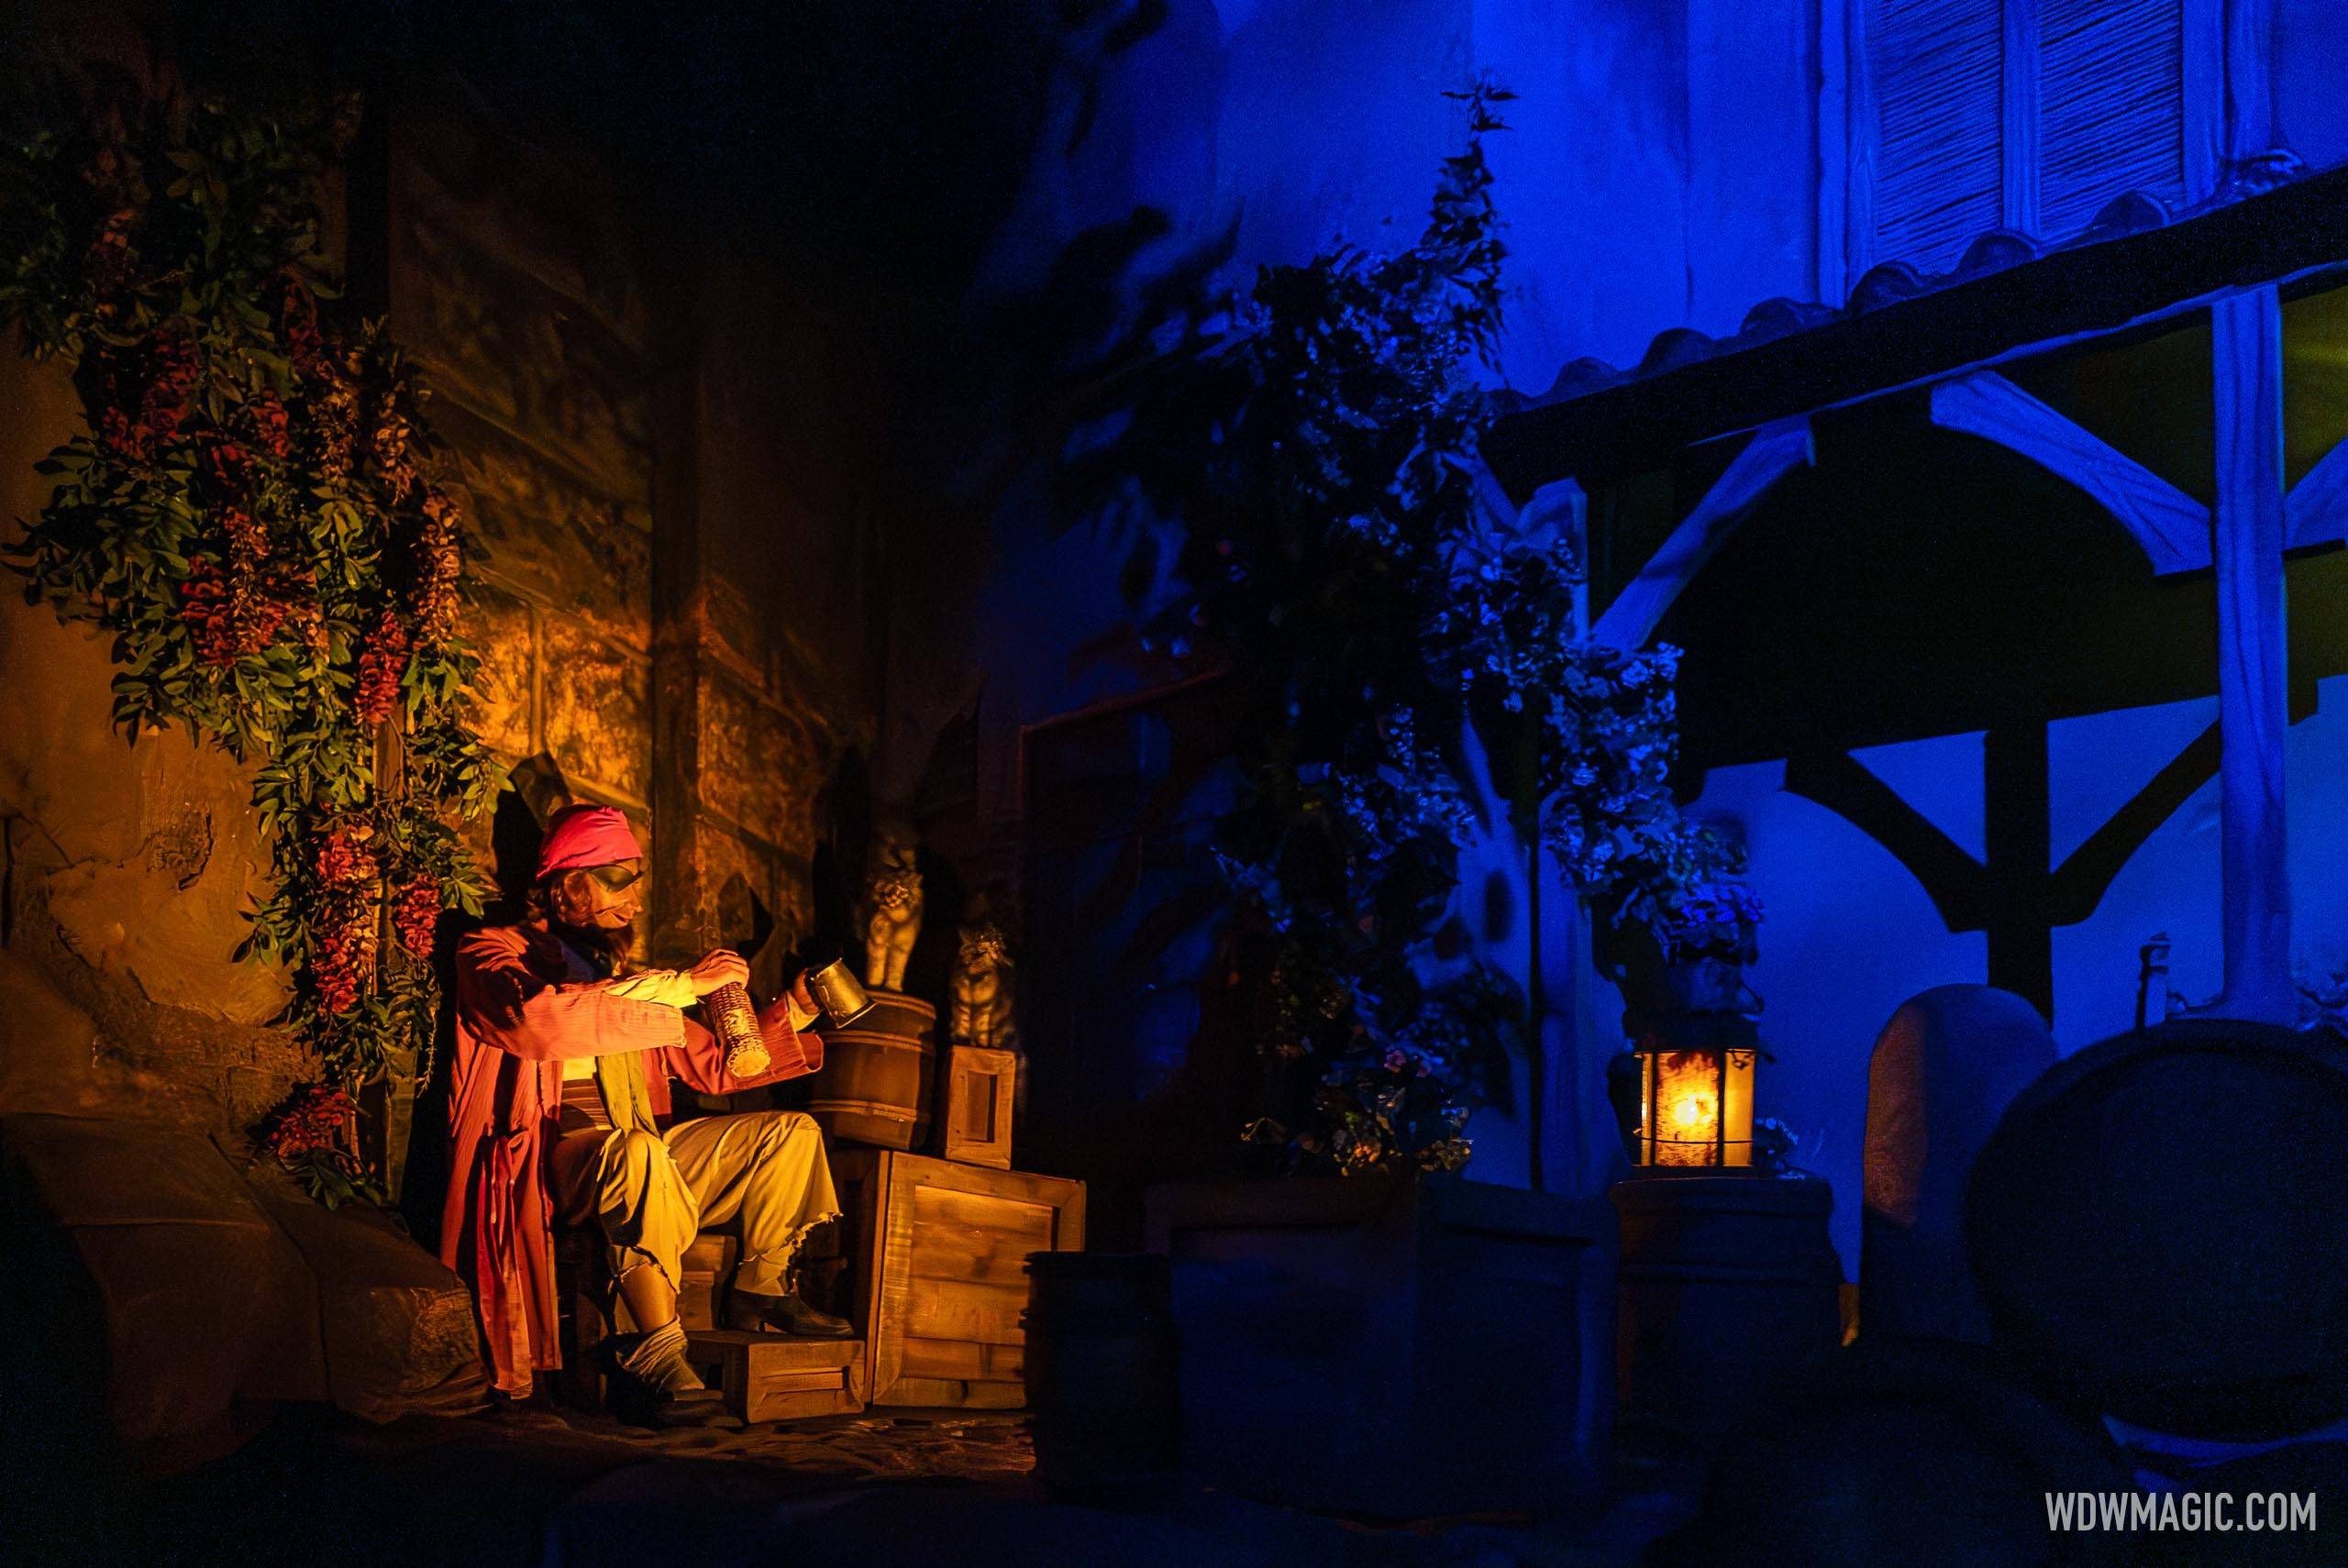 Pirates of the Caribbean reopening schedule